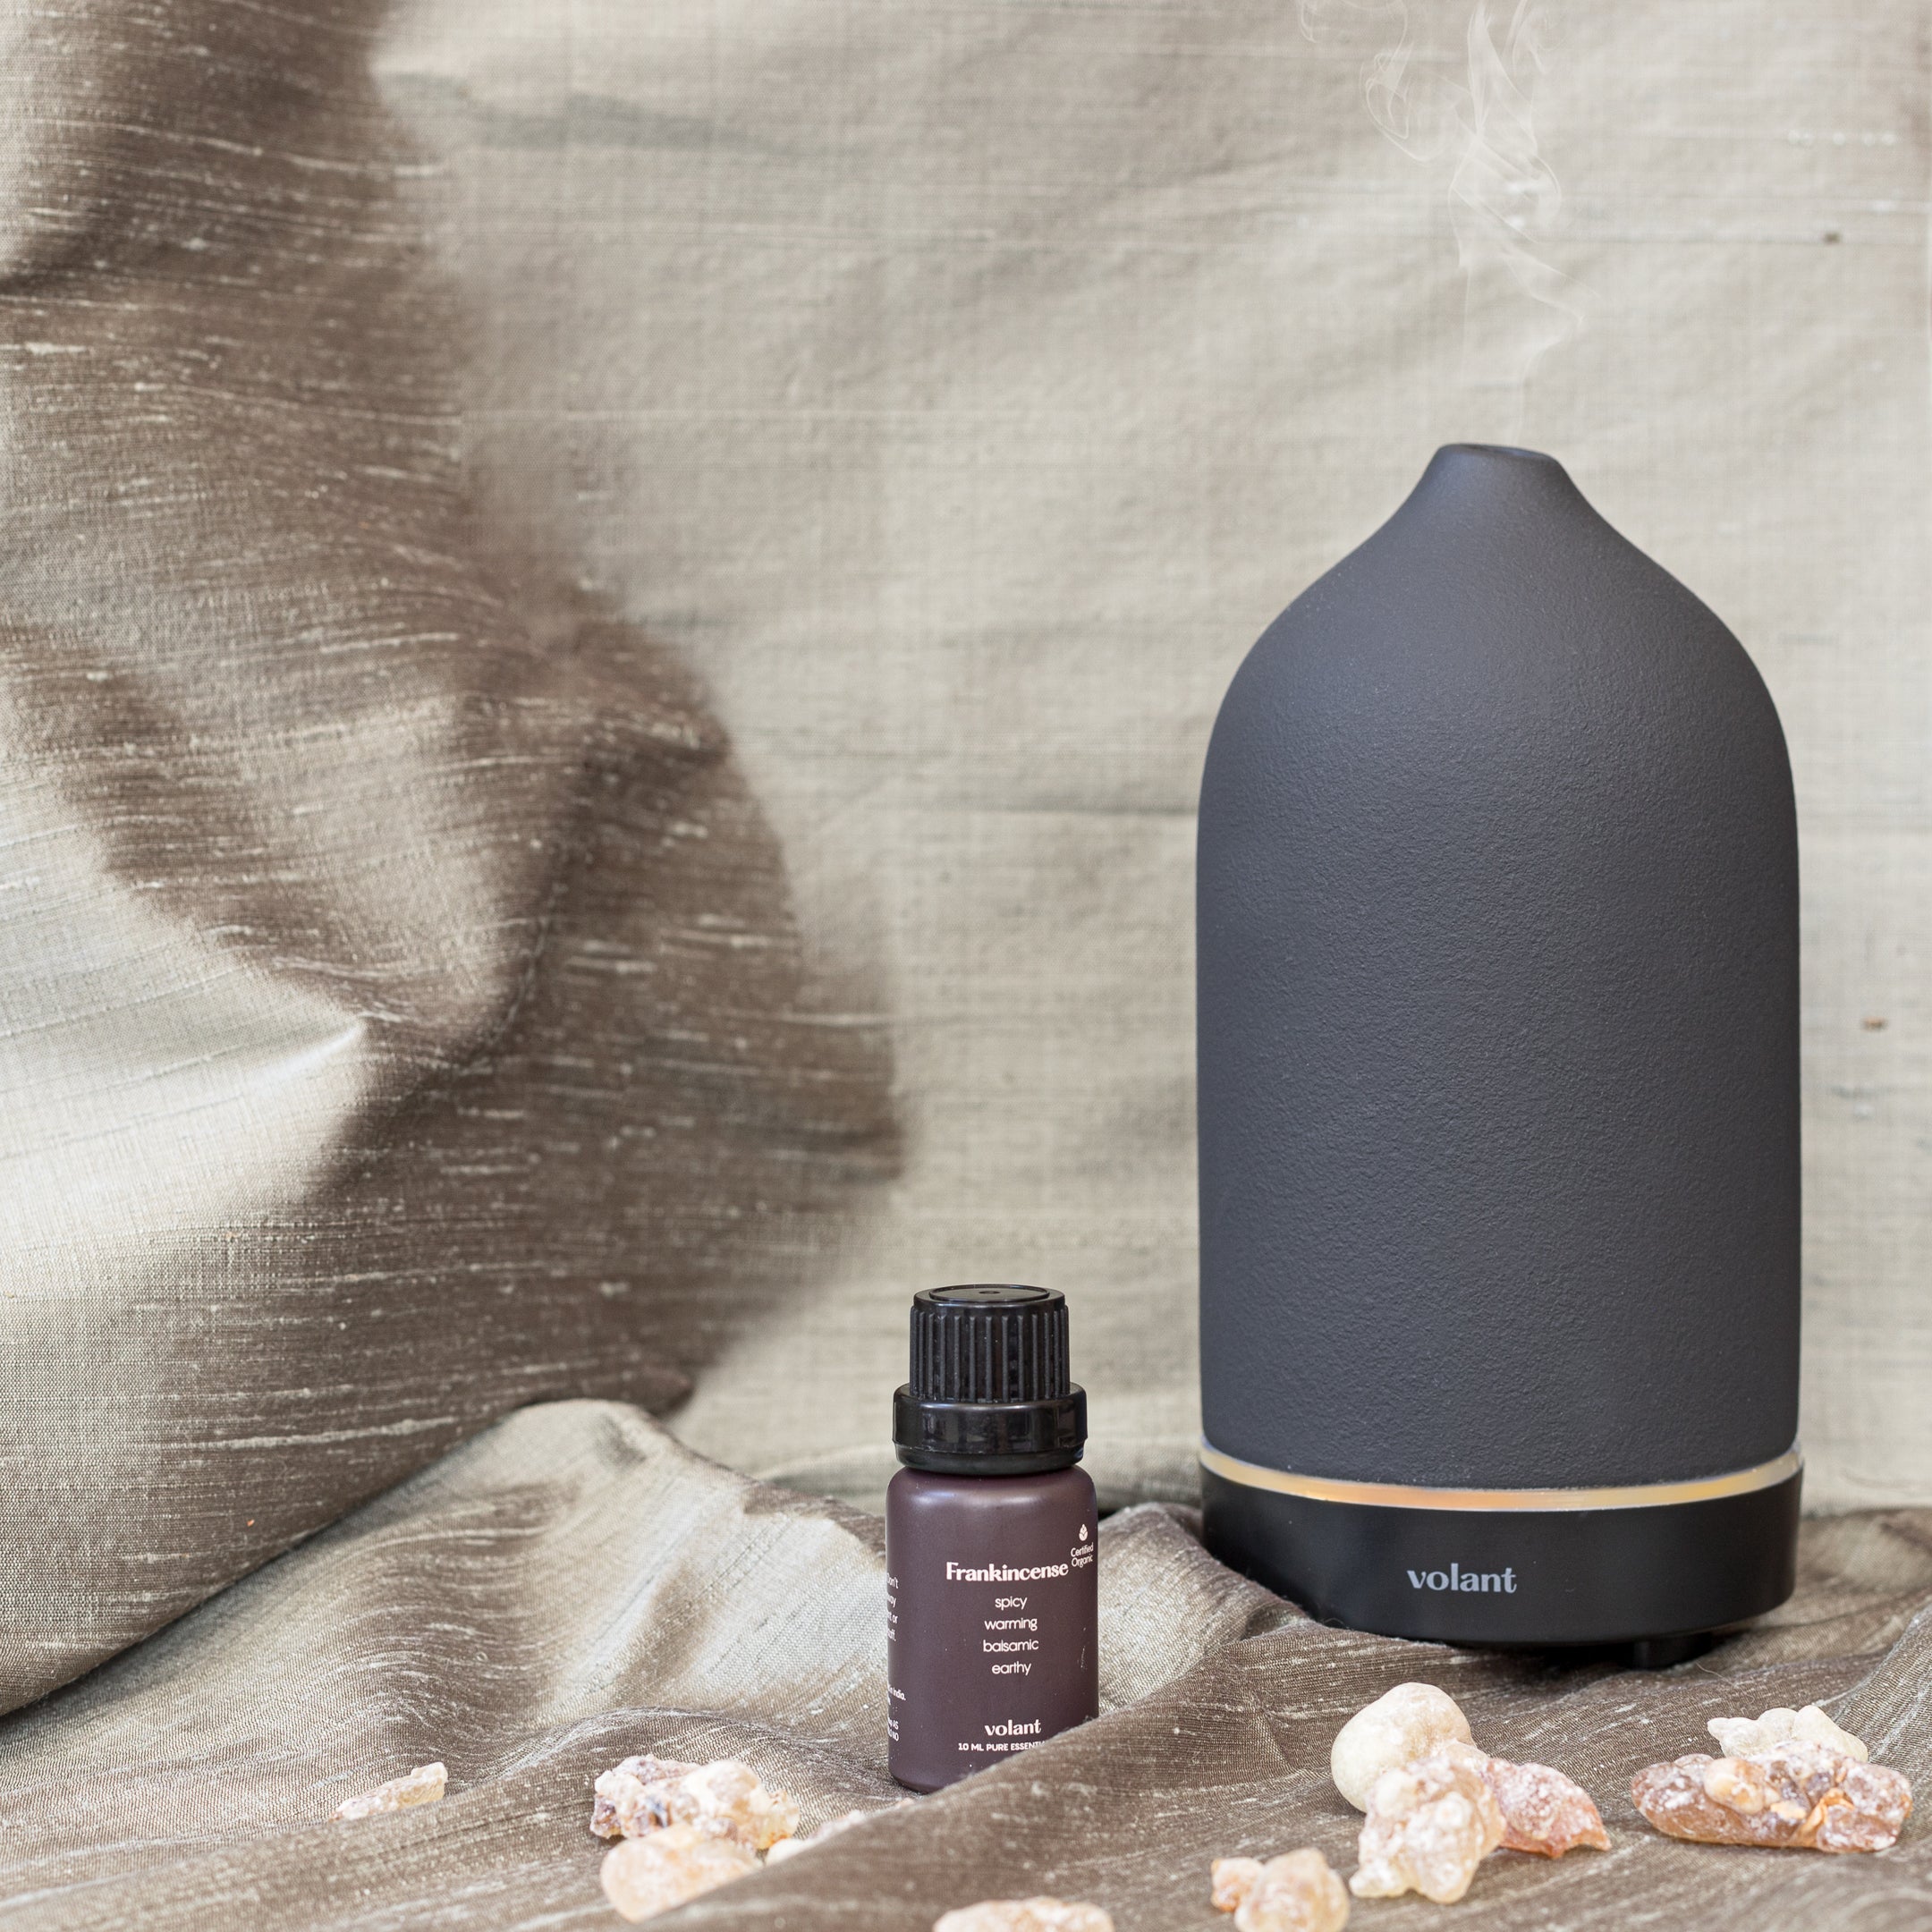 volant grey diffuser using organic frankincense essential oil helps you find your inner peace